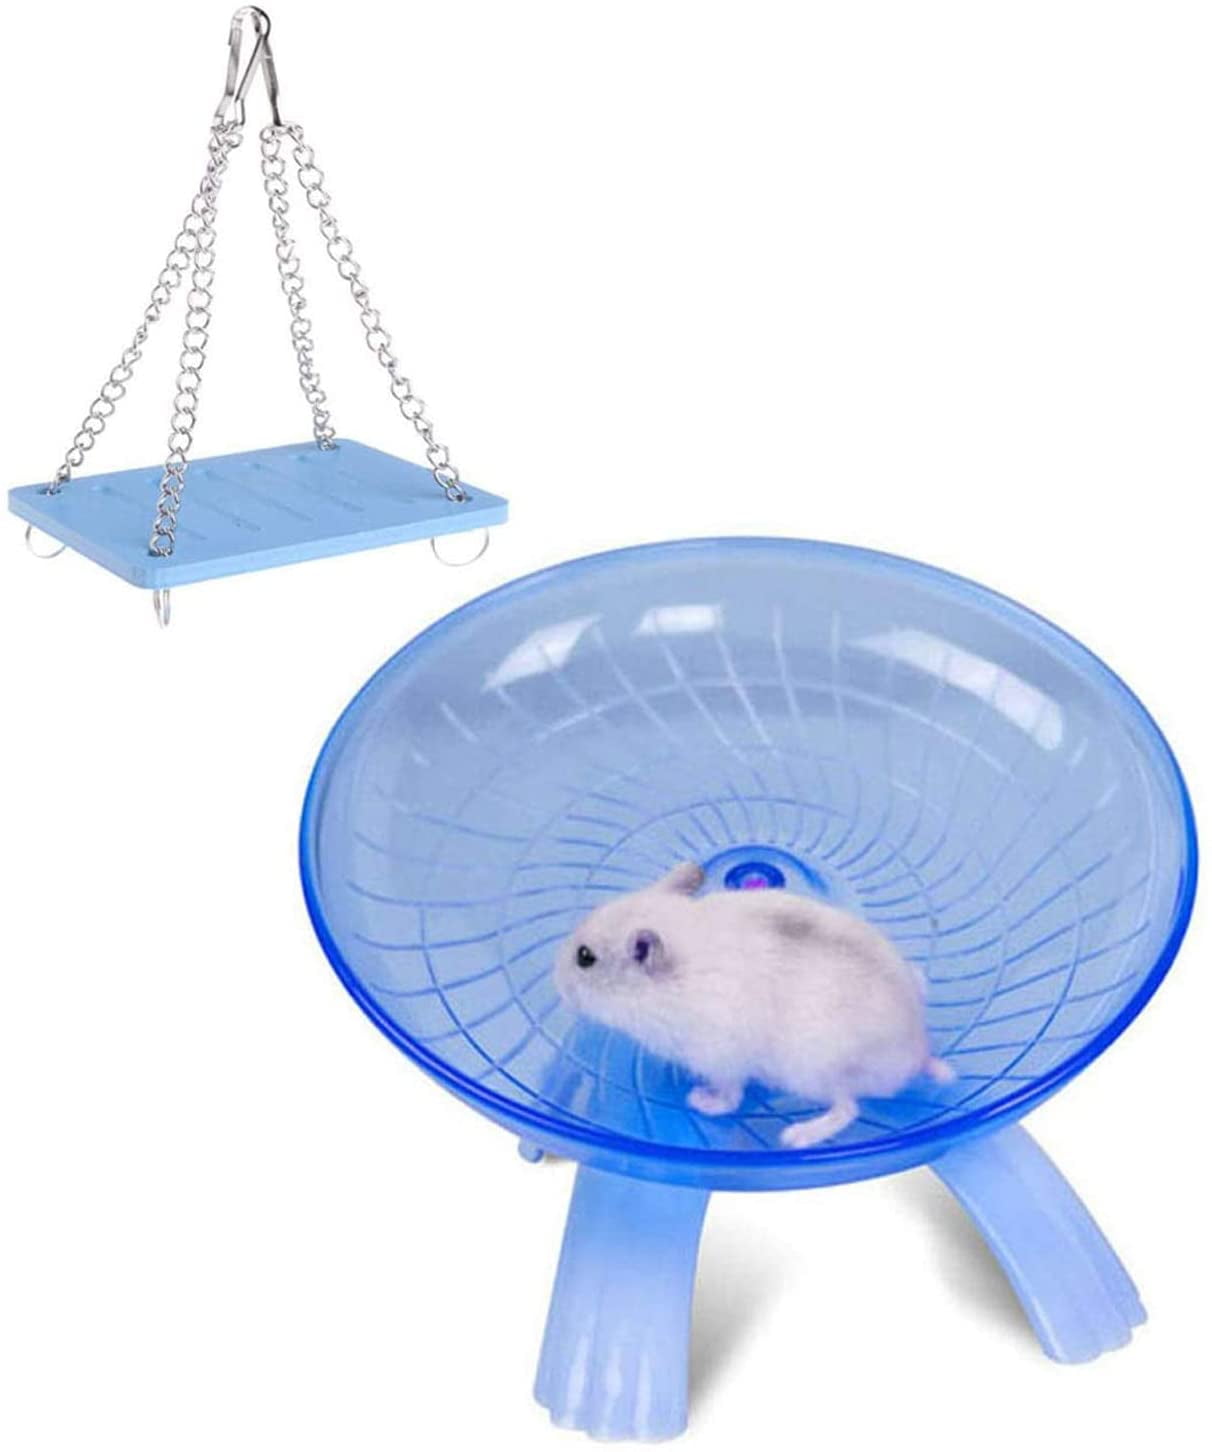 Rat Rudy Exercise Running Wheel for Mouse Alfie Pet Chinchilla Gerbil and Dwarf Hamster